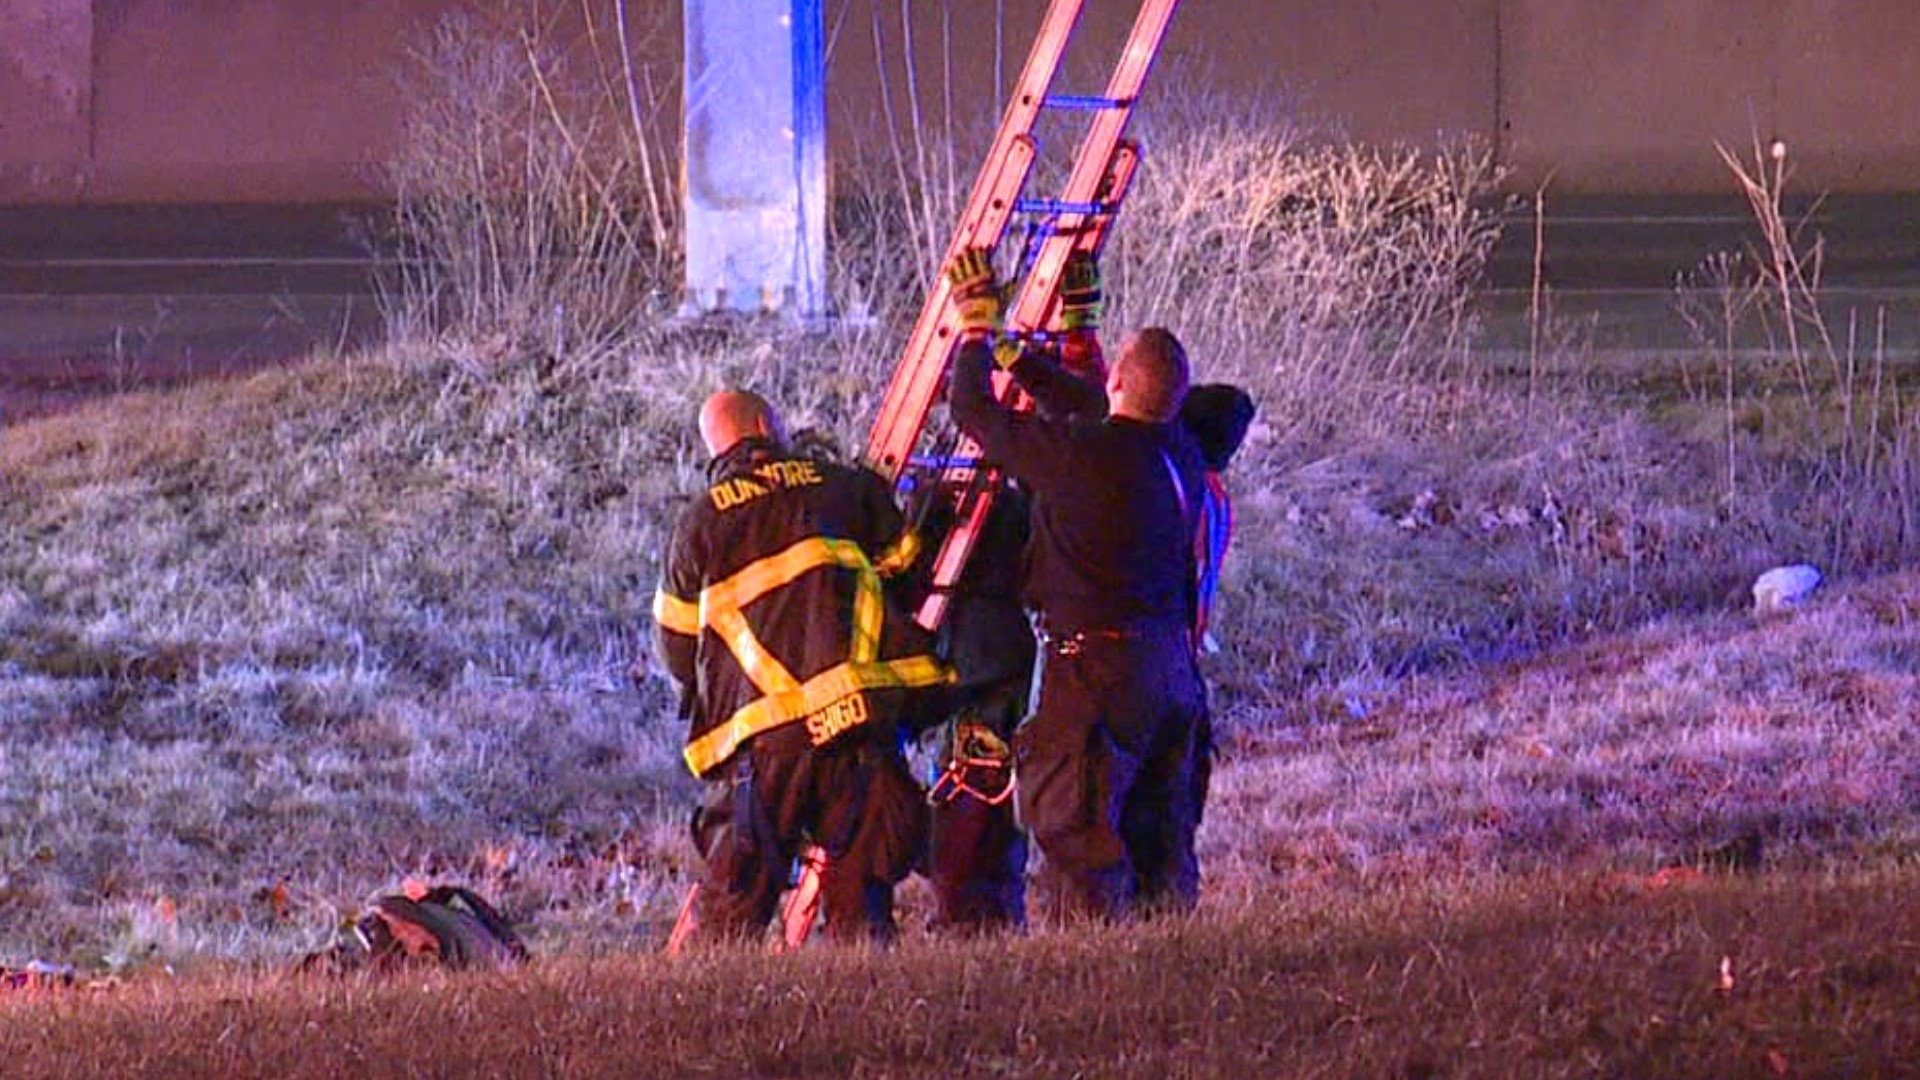 A man's body was pulled from a storm drain late Wednesday night off Interstate 81 in Dunmore.